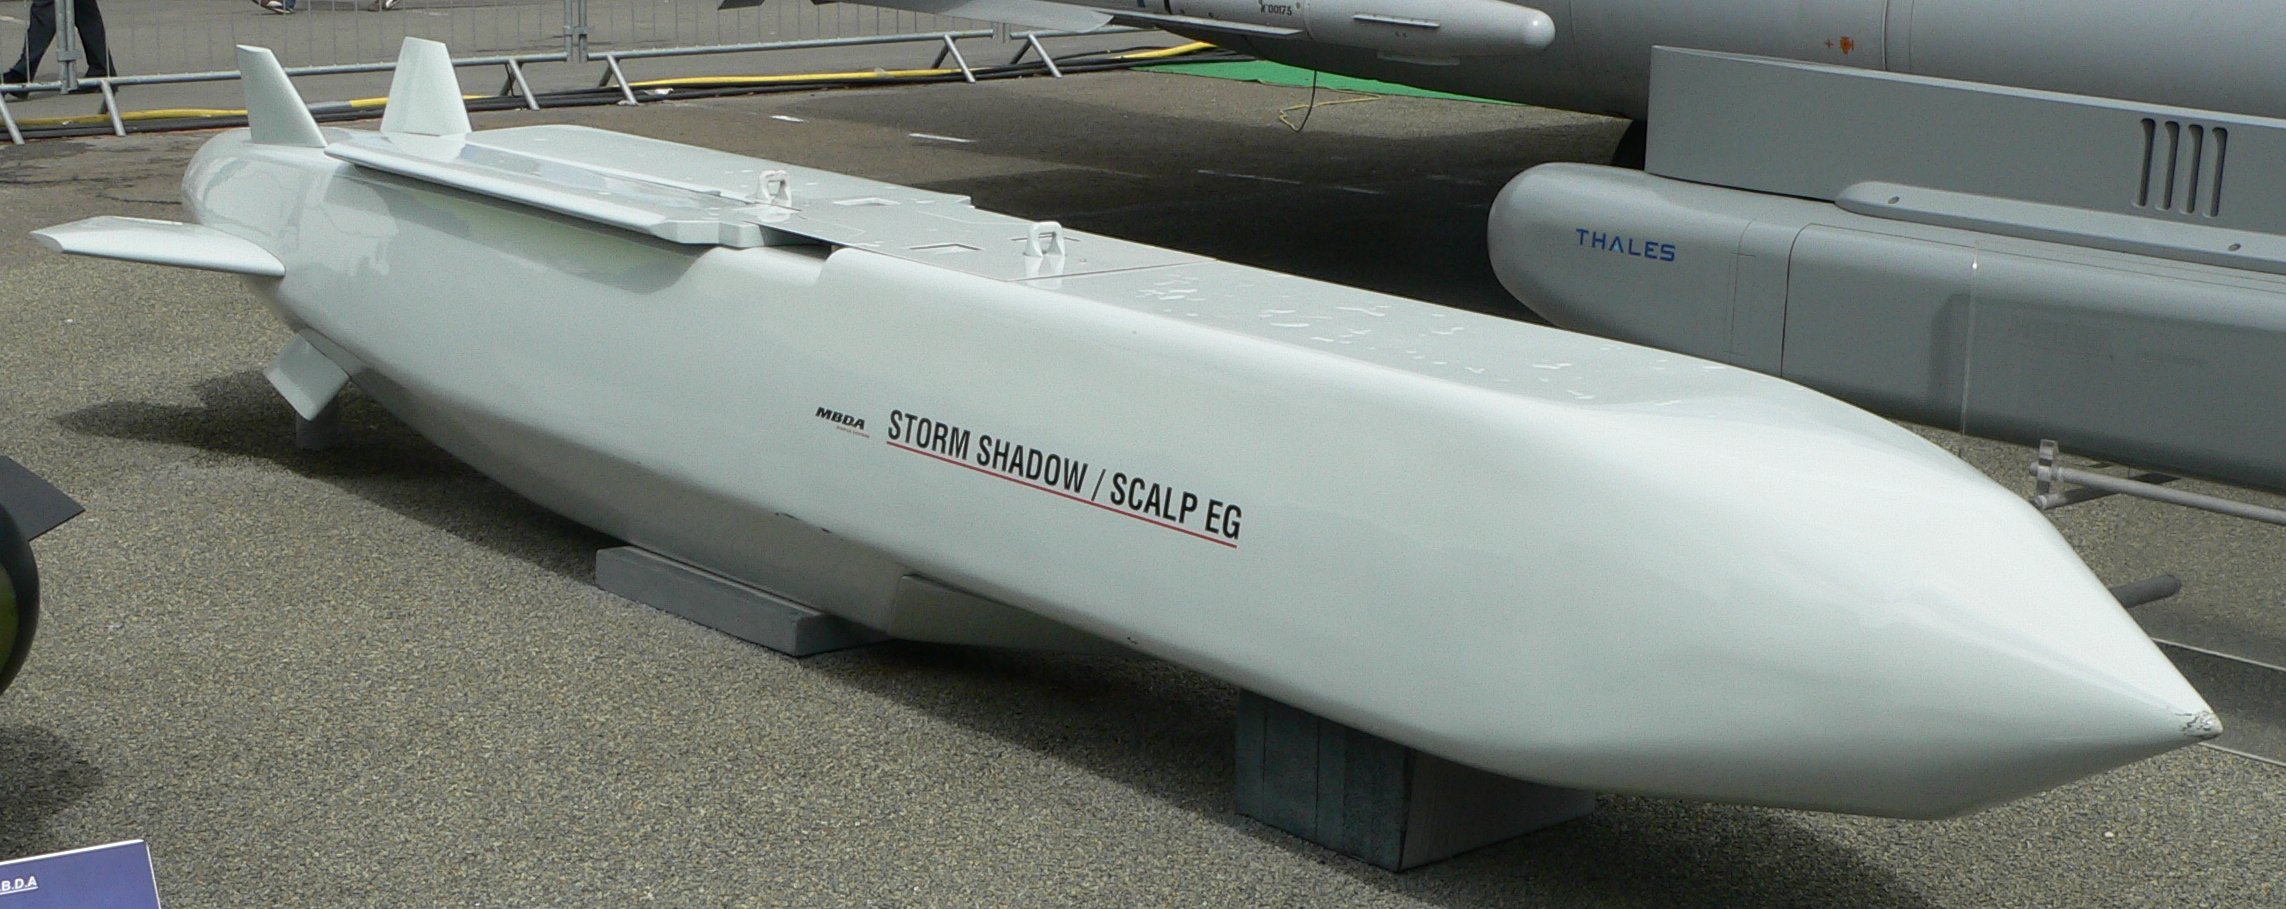 The MBDA SCALP/EG Storm Shadow air-launched cruise missile (ALCM).